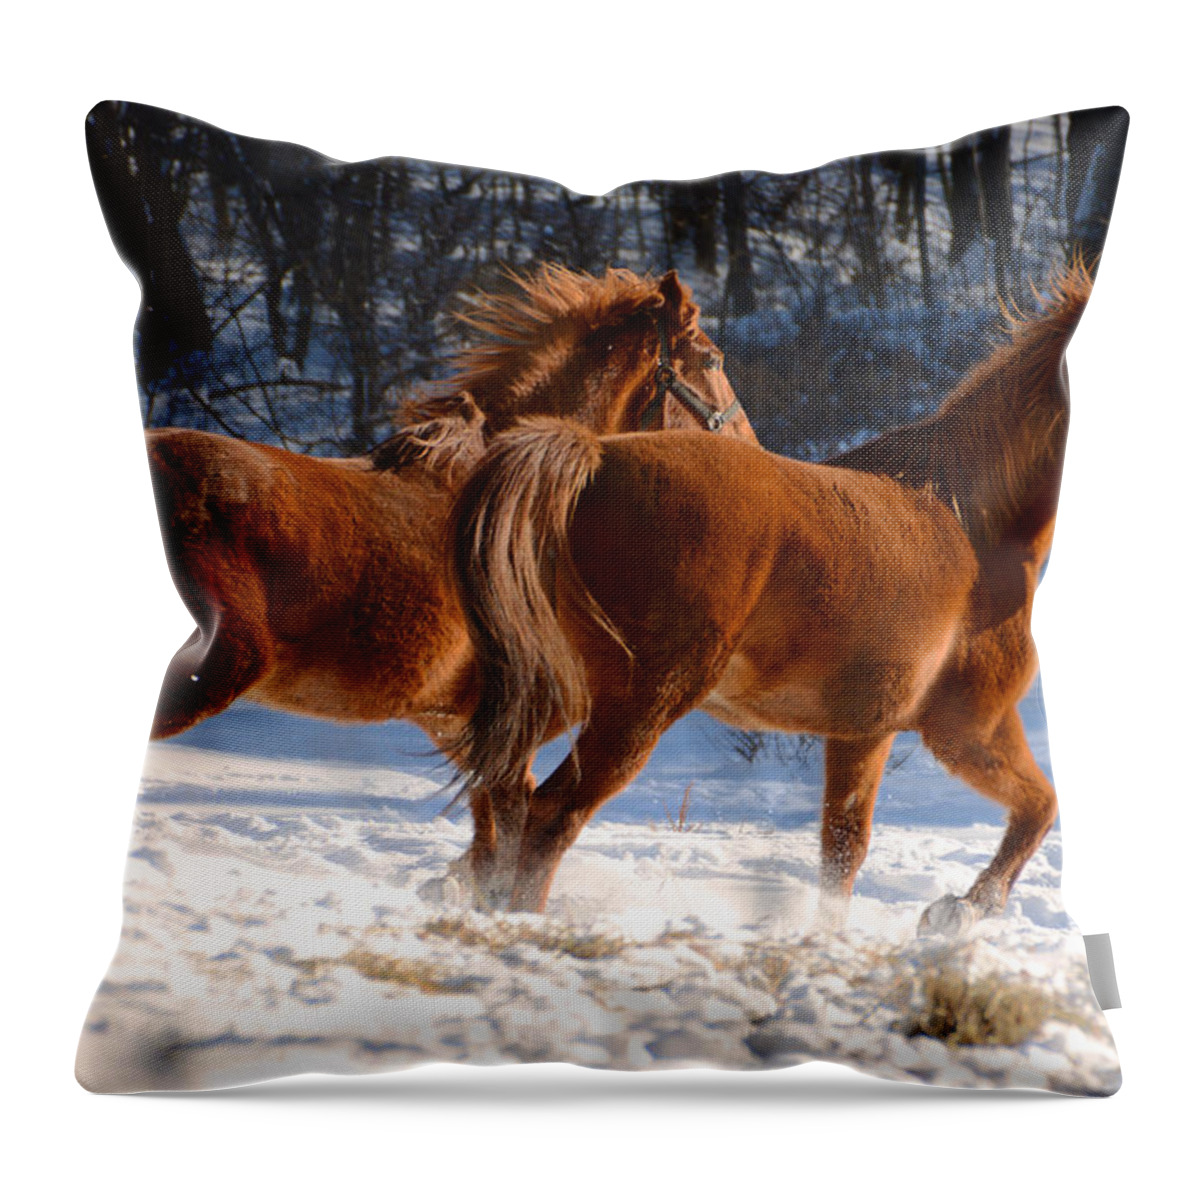 Horse Throw Pillow featuring the photograph Moving In Motion 2 by Tracy Winter